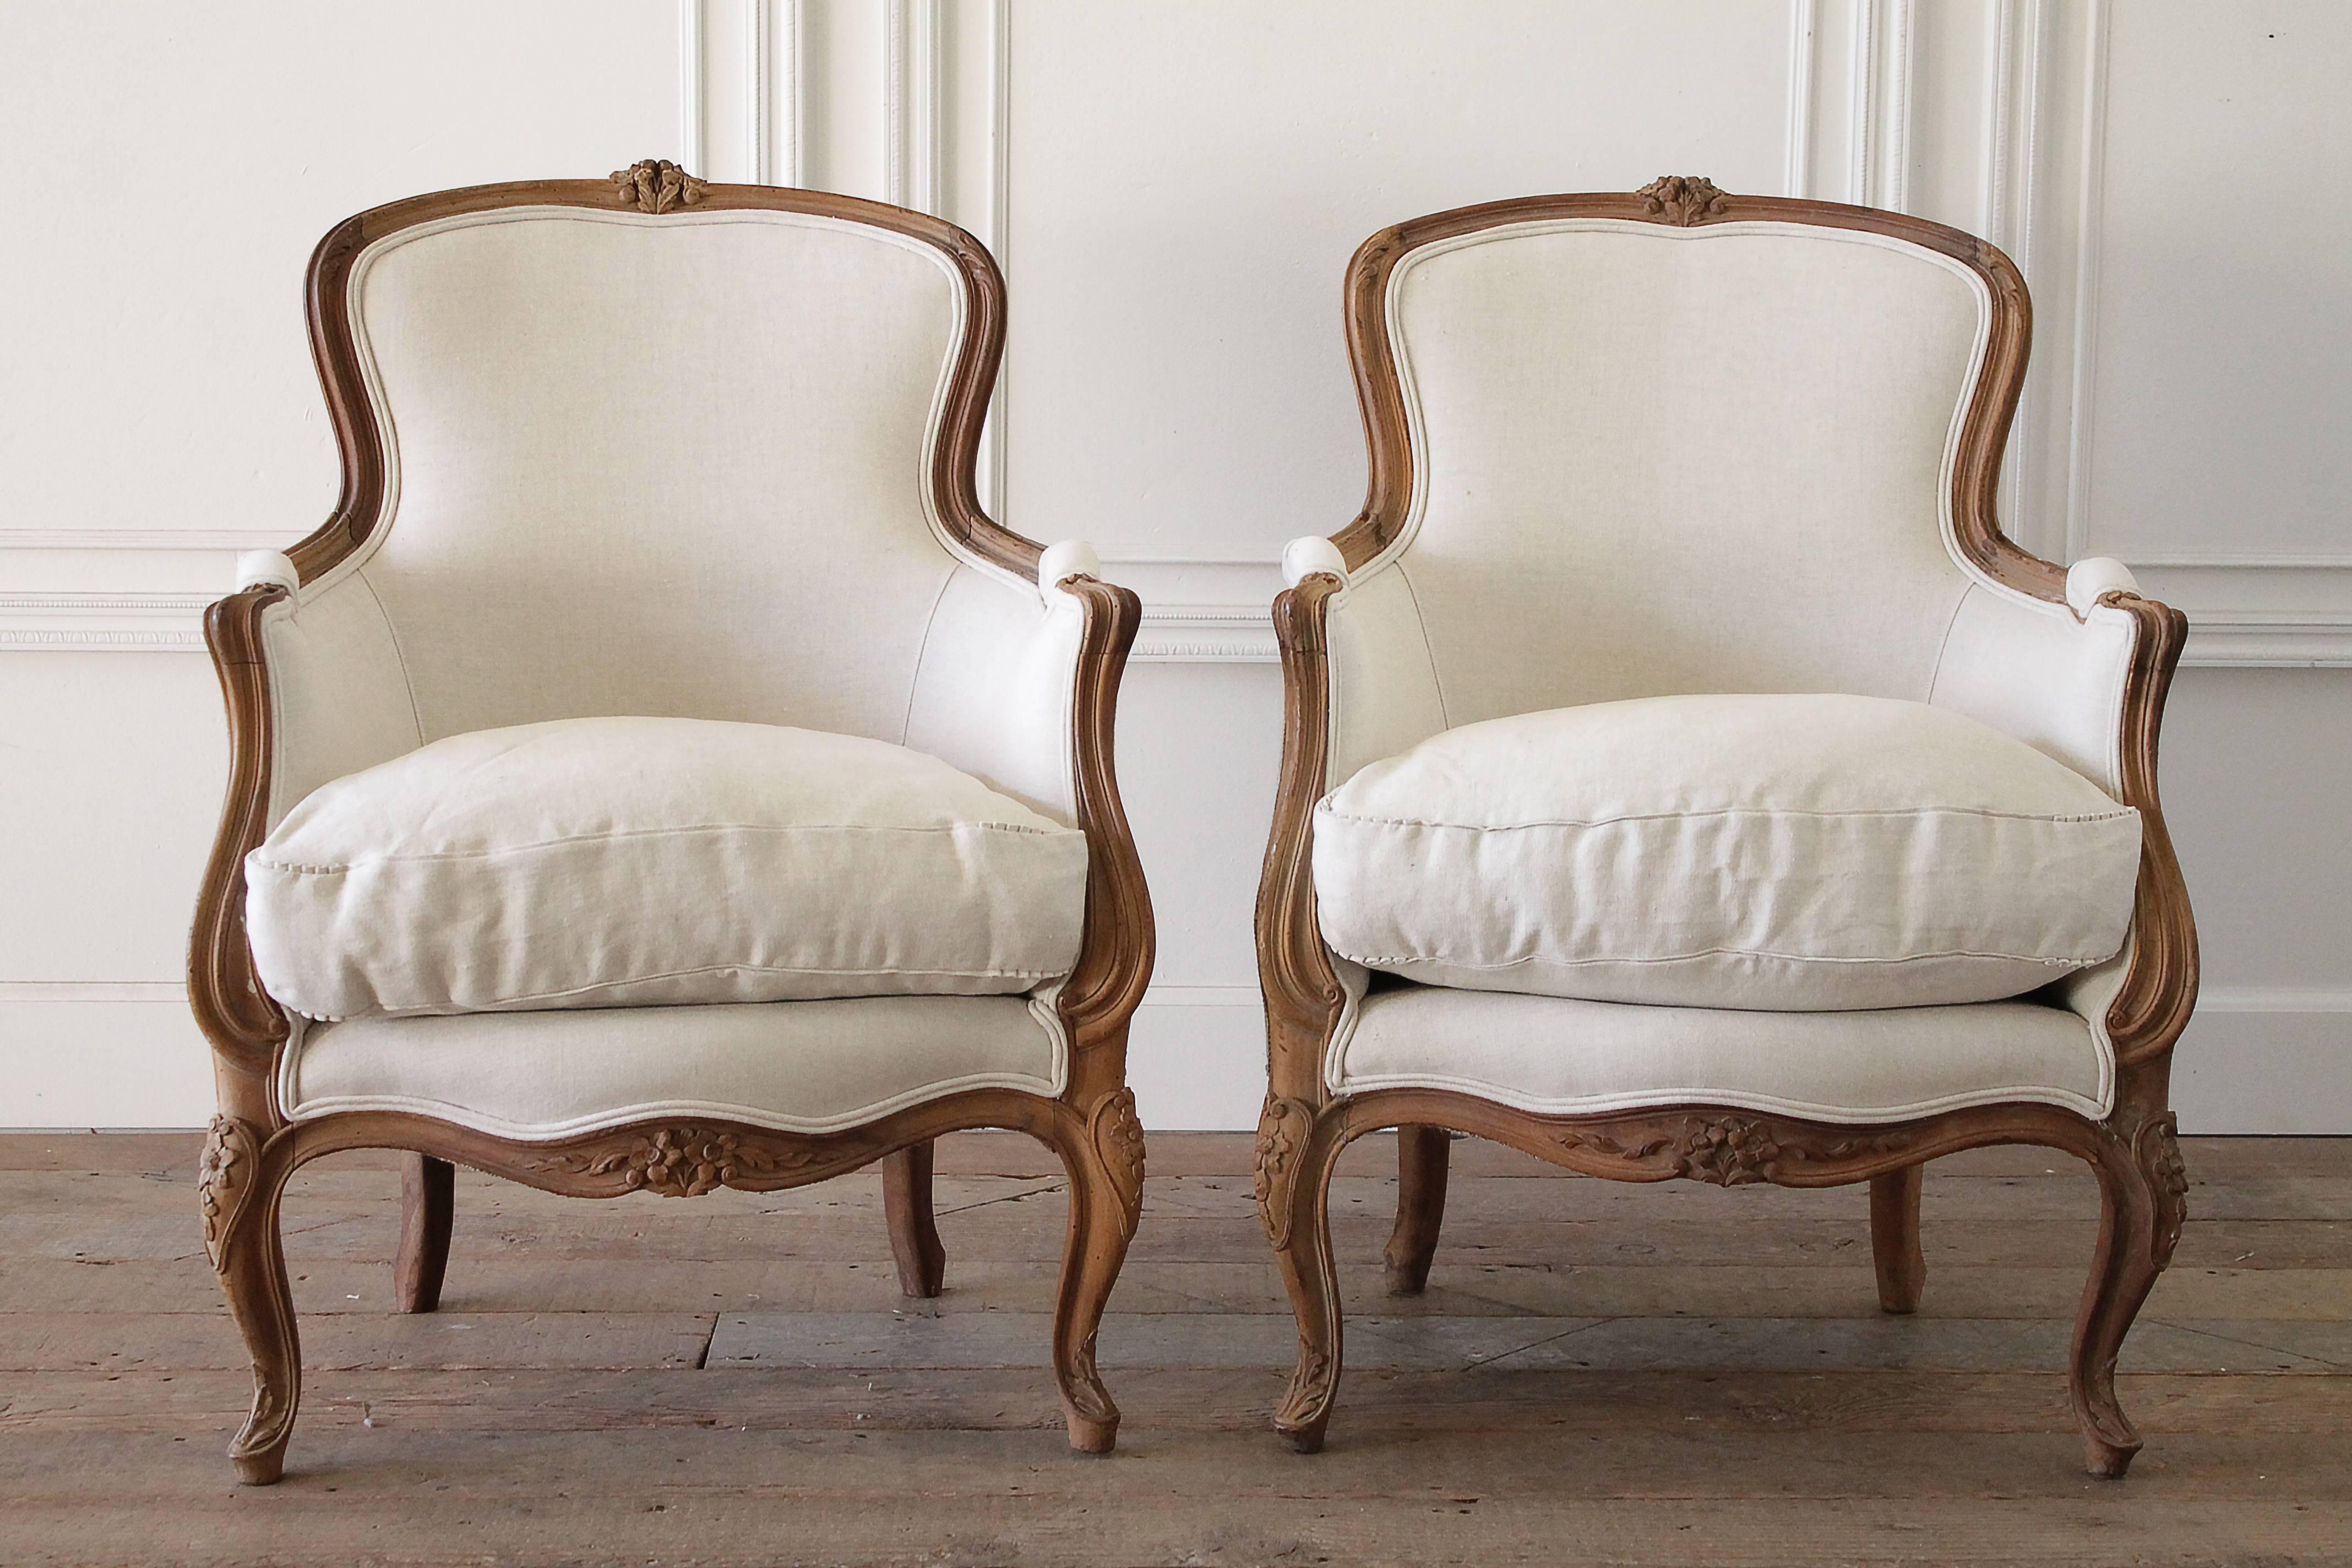 1 left, natural waxed finished carved bergere chairs. These chairs have been reupholstered in a soft light oatmeal colored Belgian linen. The seat cushions have a down cloud style cushion, with zipper closure and our 1/4" flange and pleated